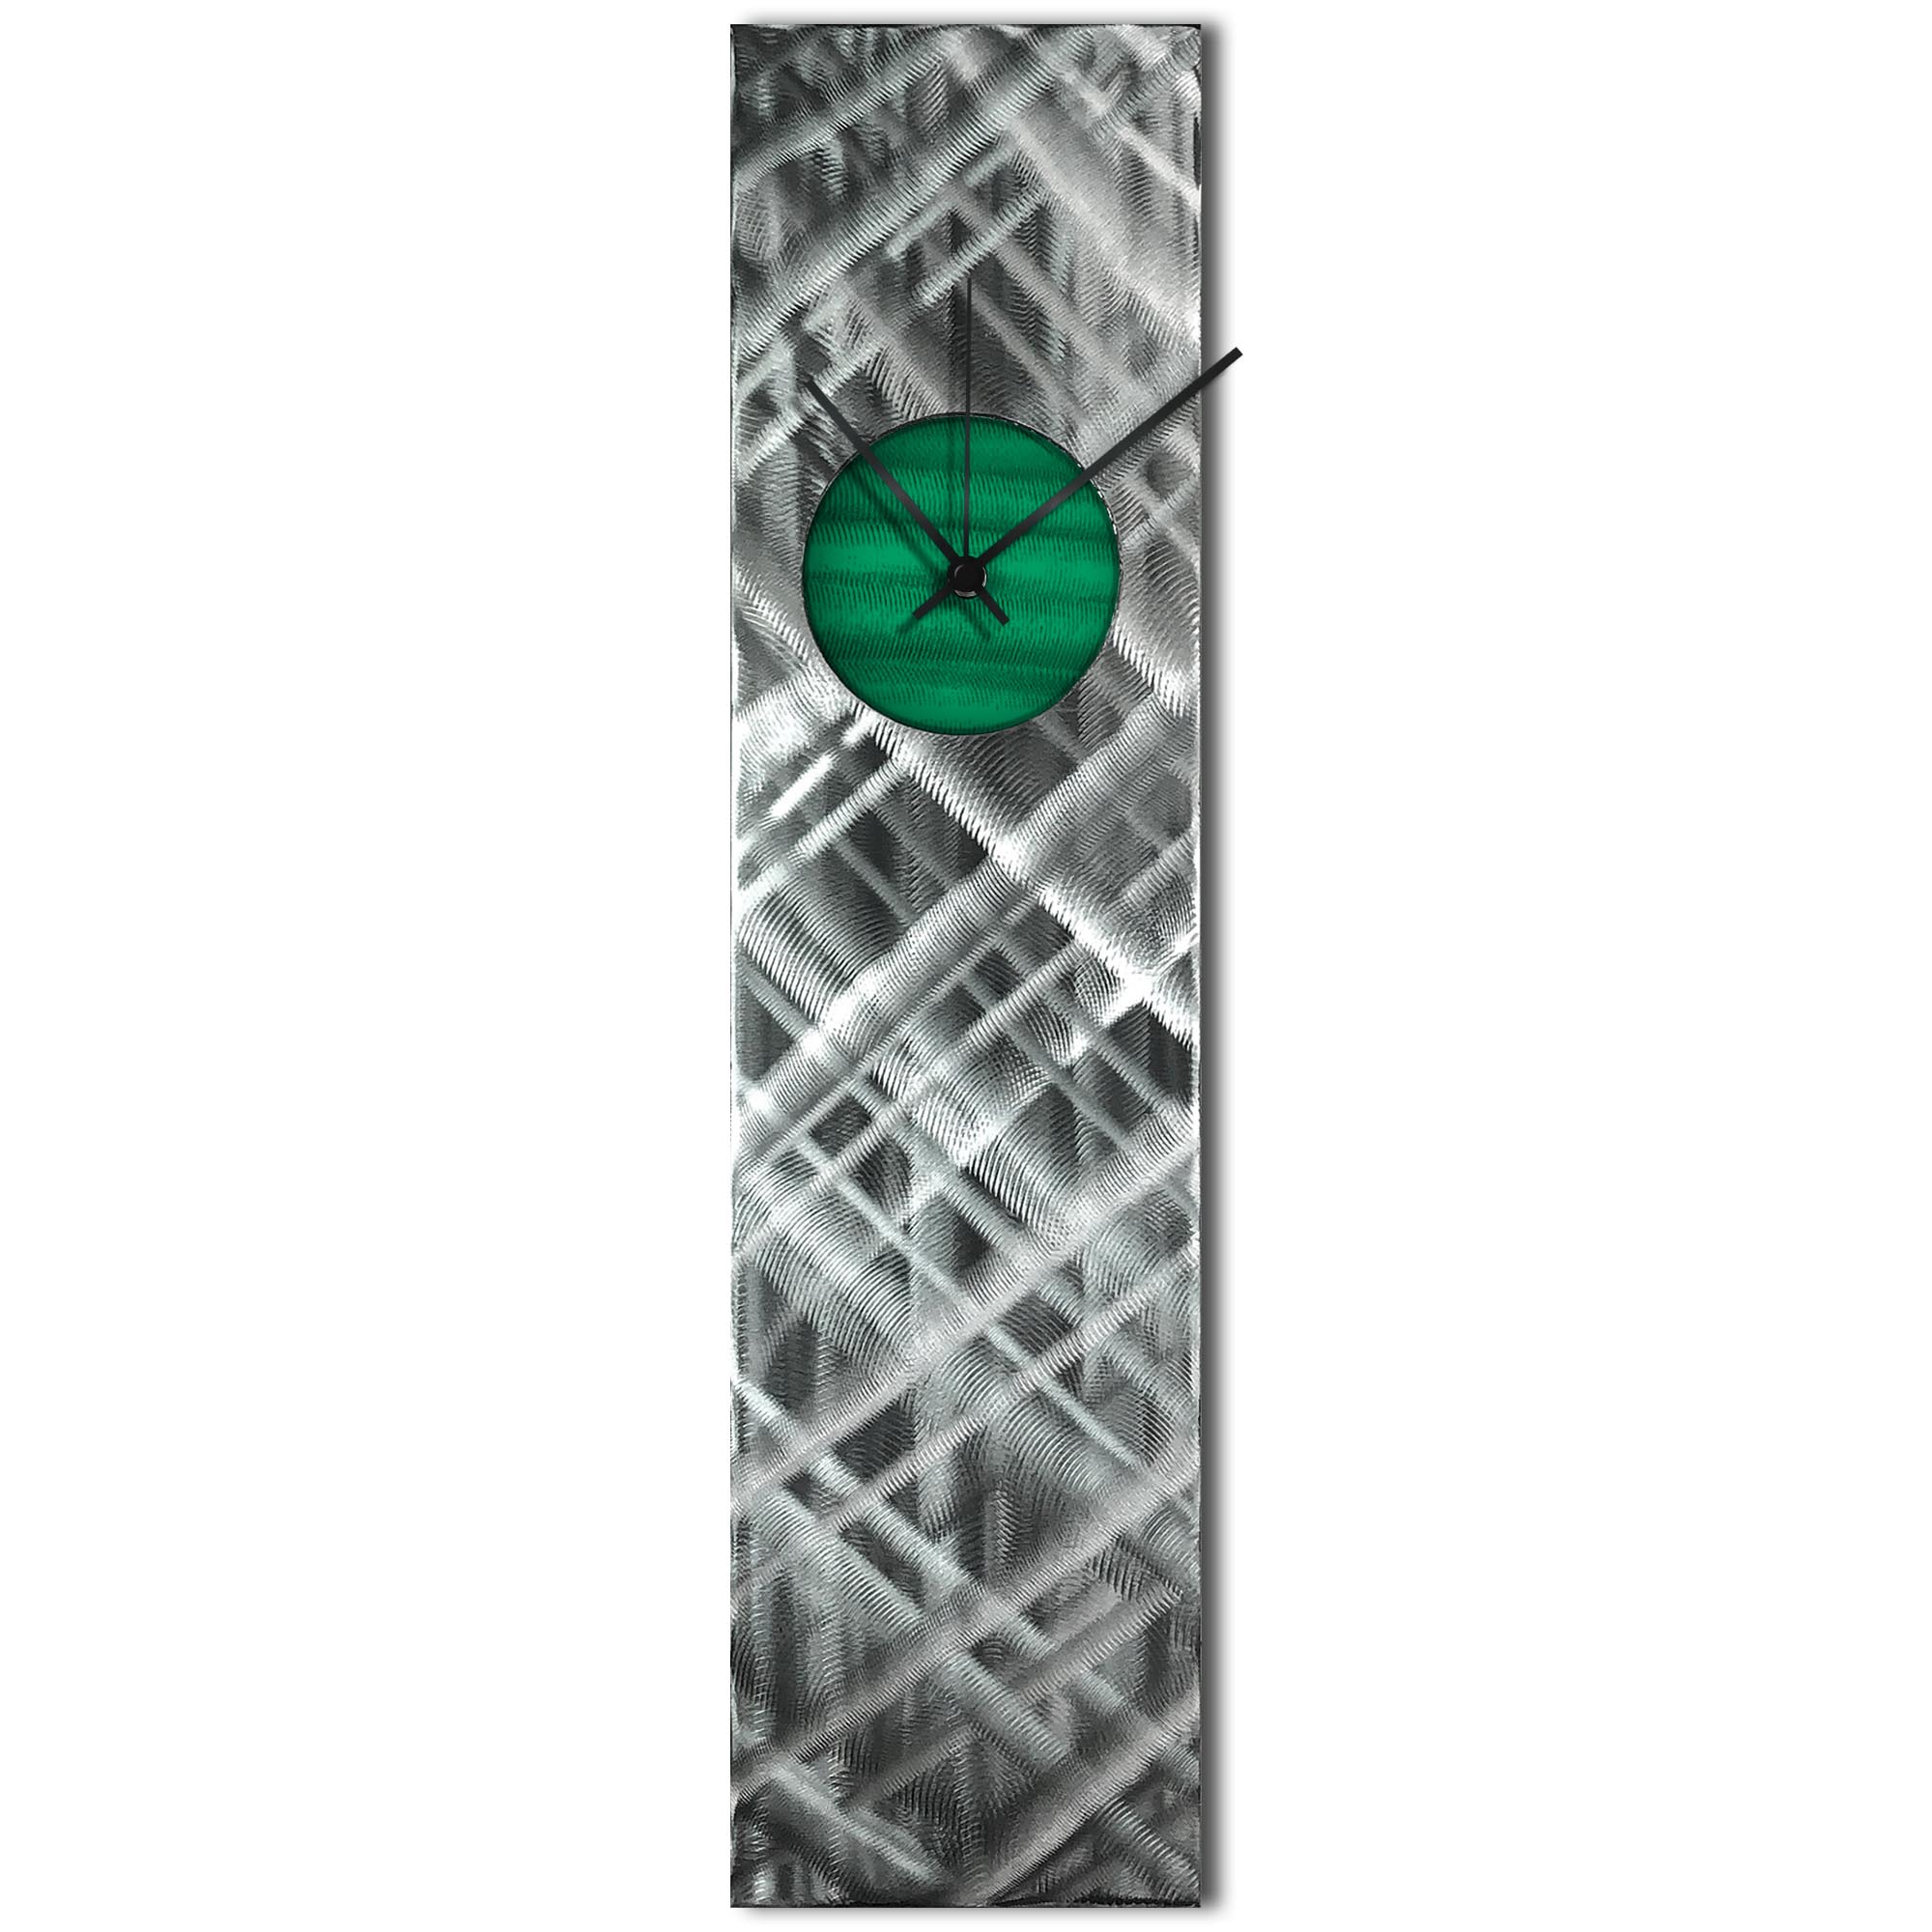 Helena Martin 'Plaid Relief Clock Green' 6in x 24in Modern Wall Clock on Ground and Painted Metal